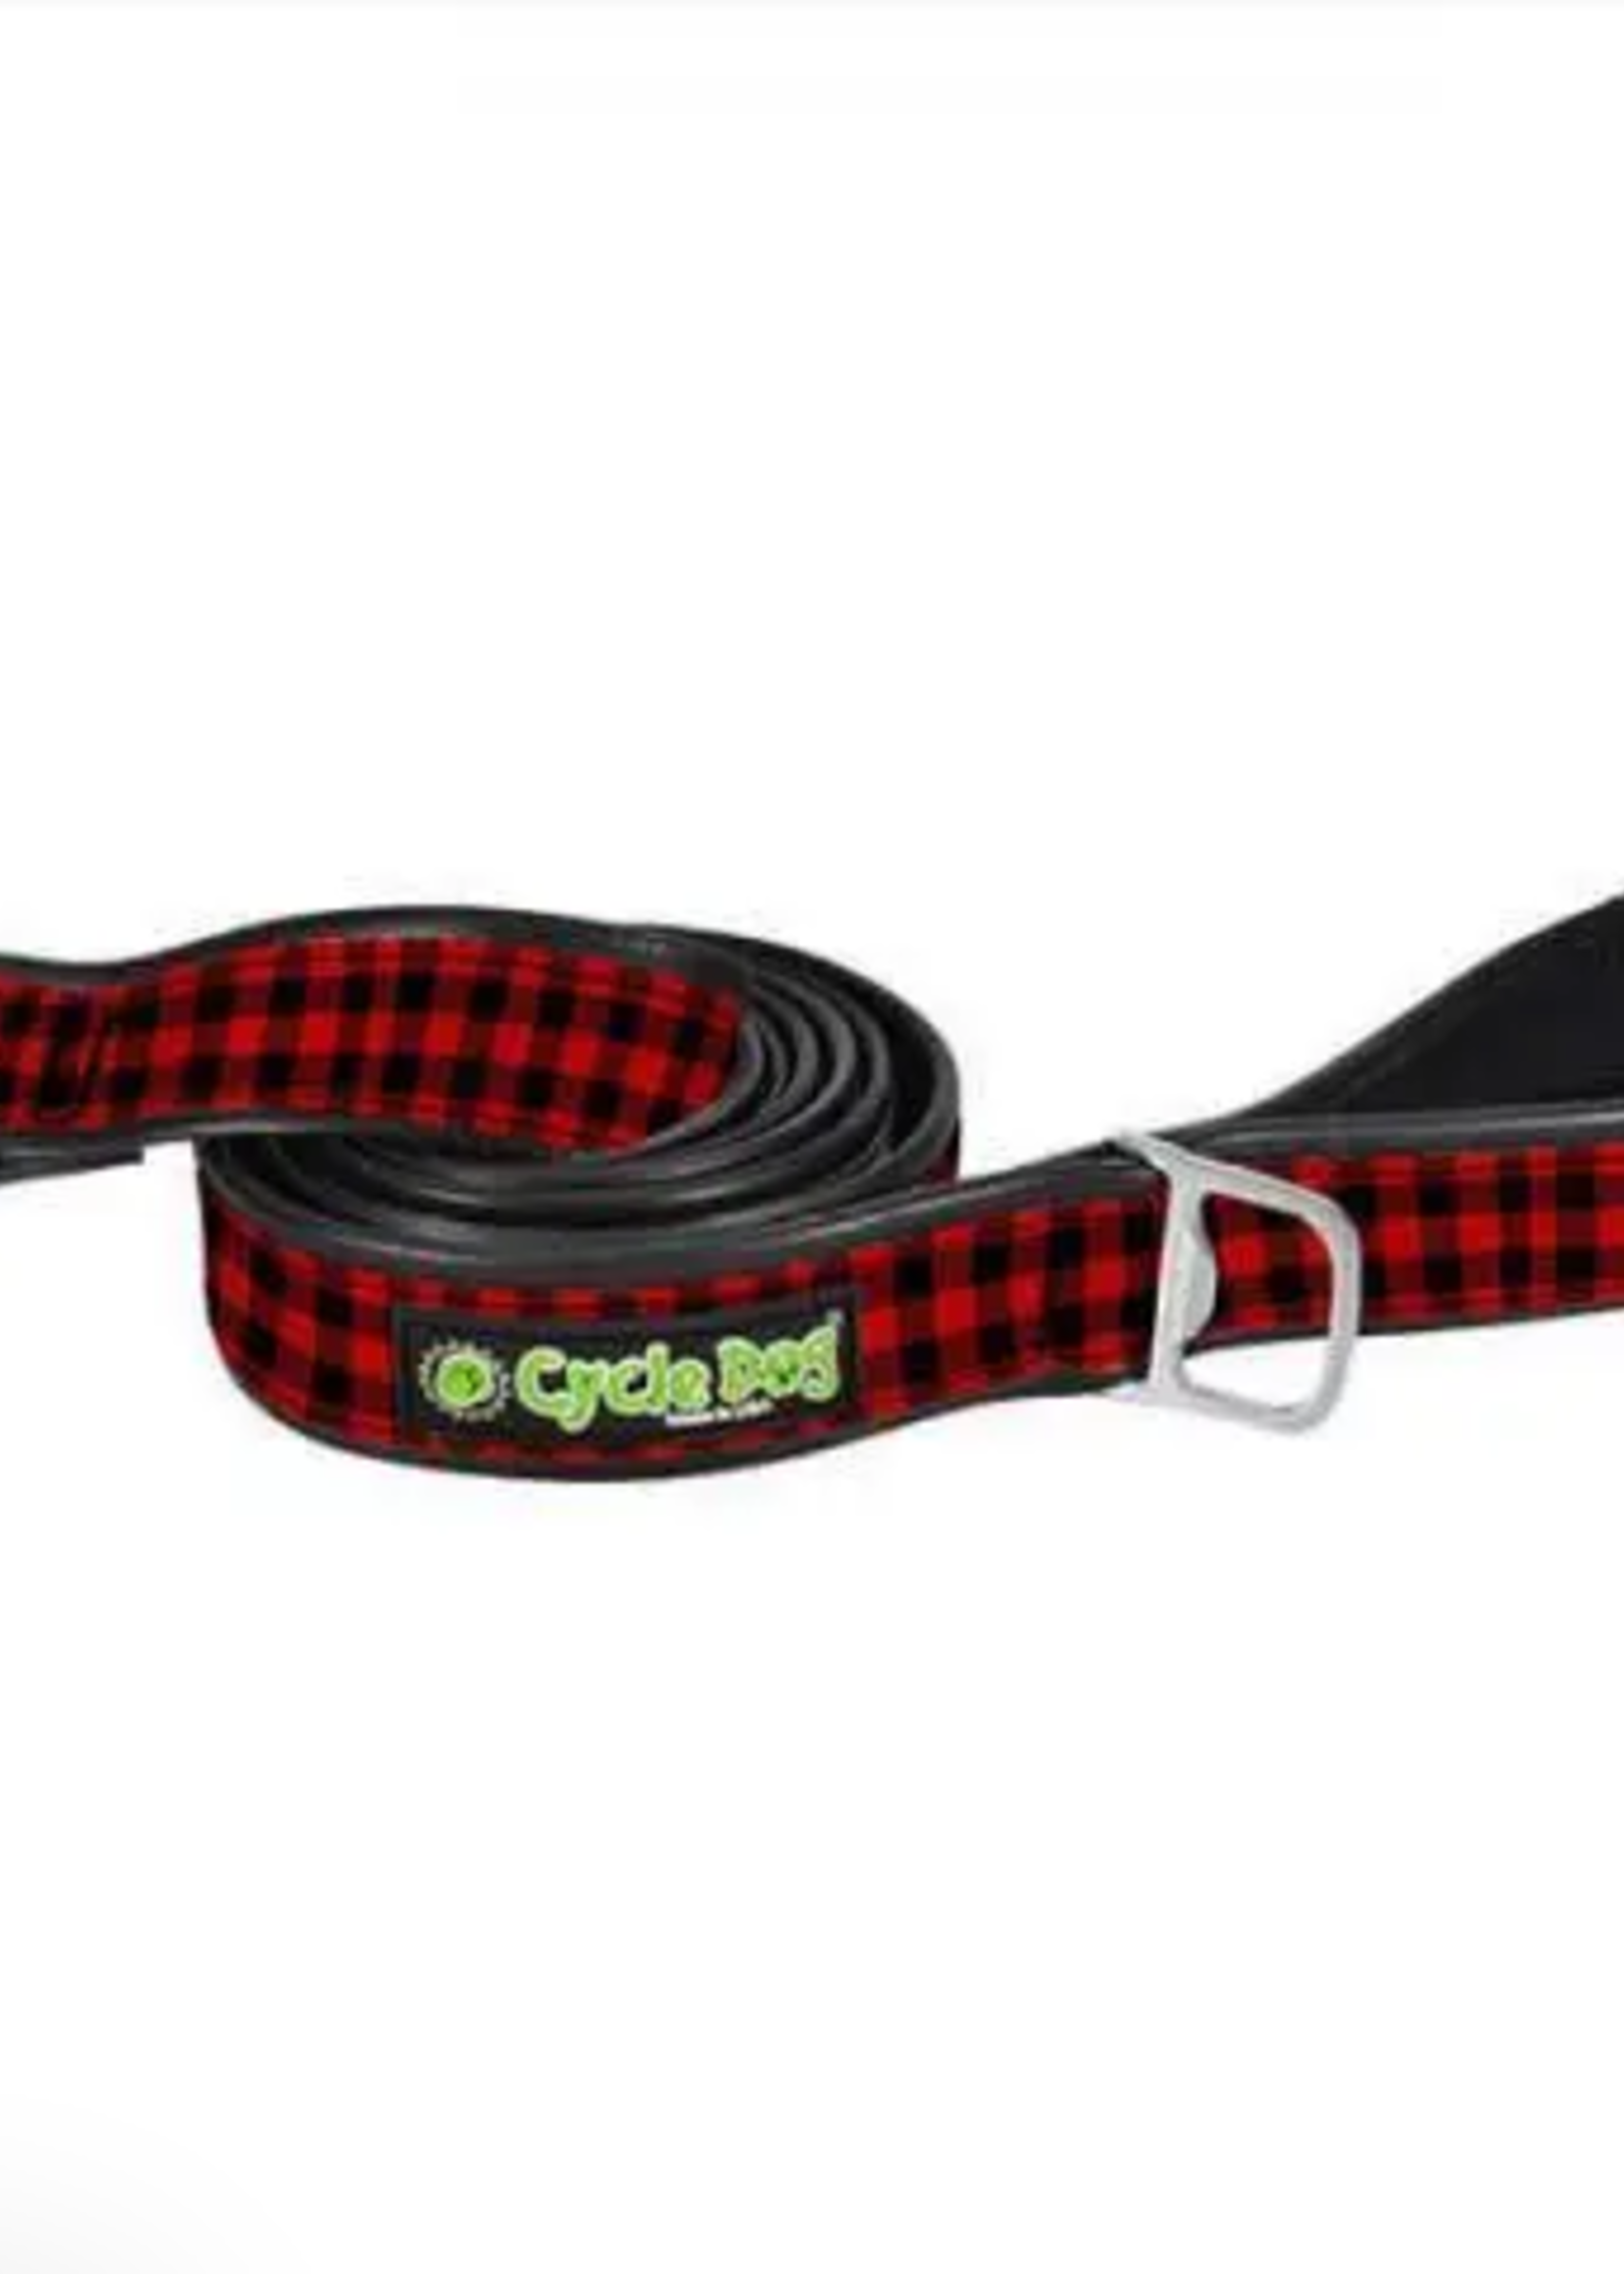 cycle dog Cycle Dog WaterProof No Stink Leash - Red Plaid